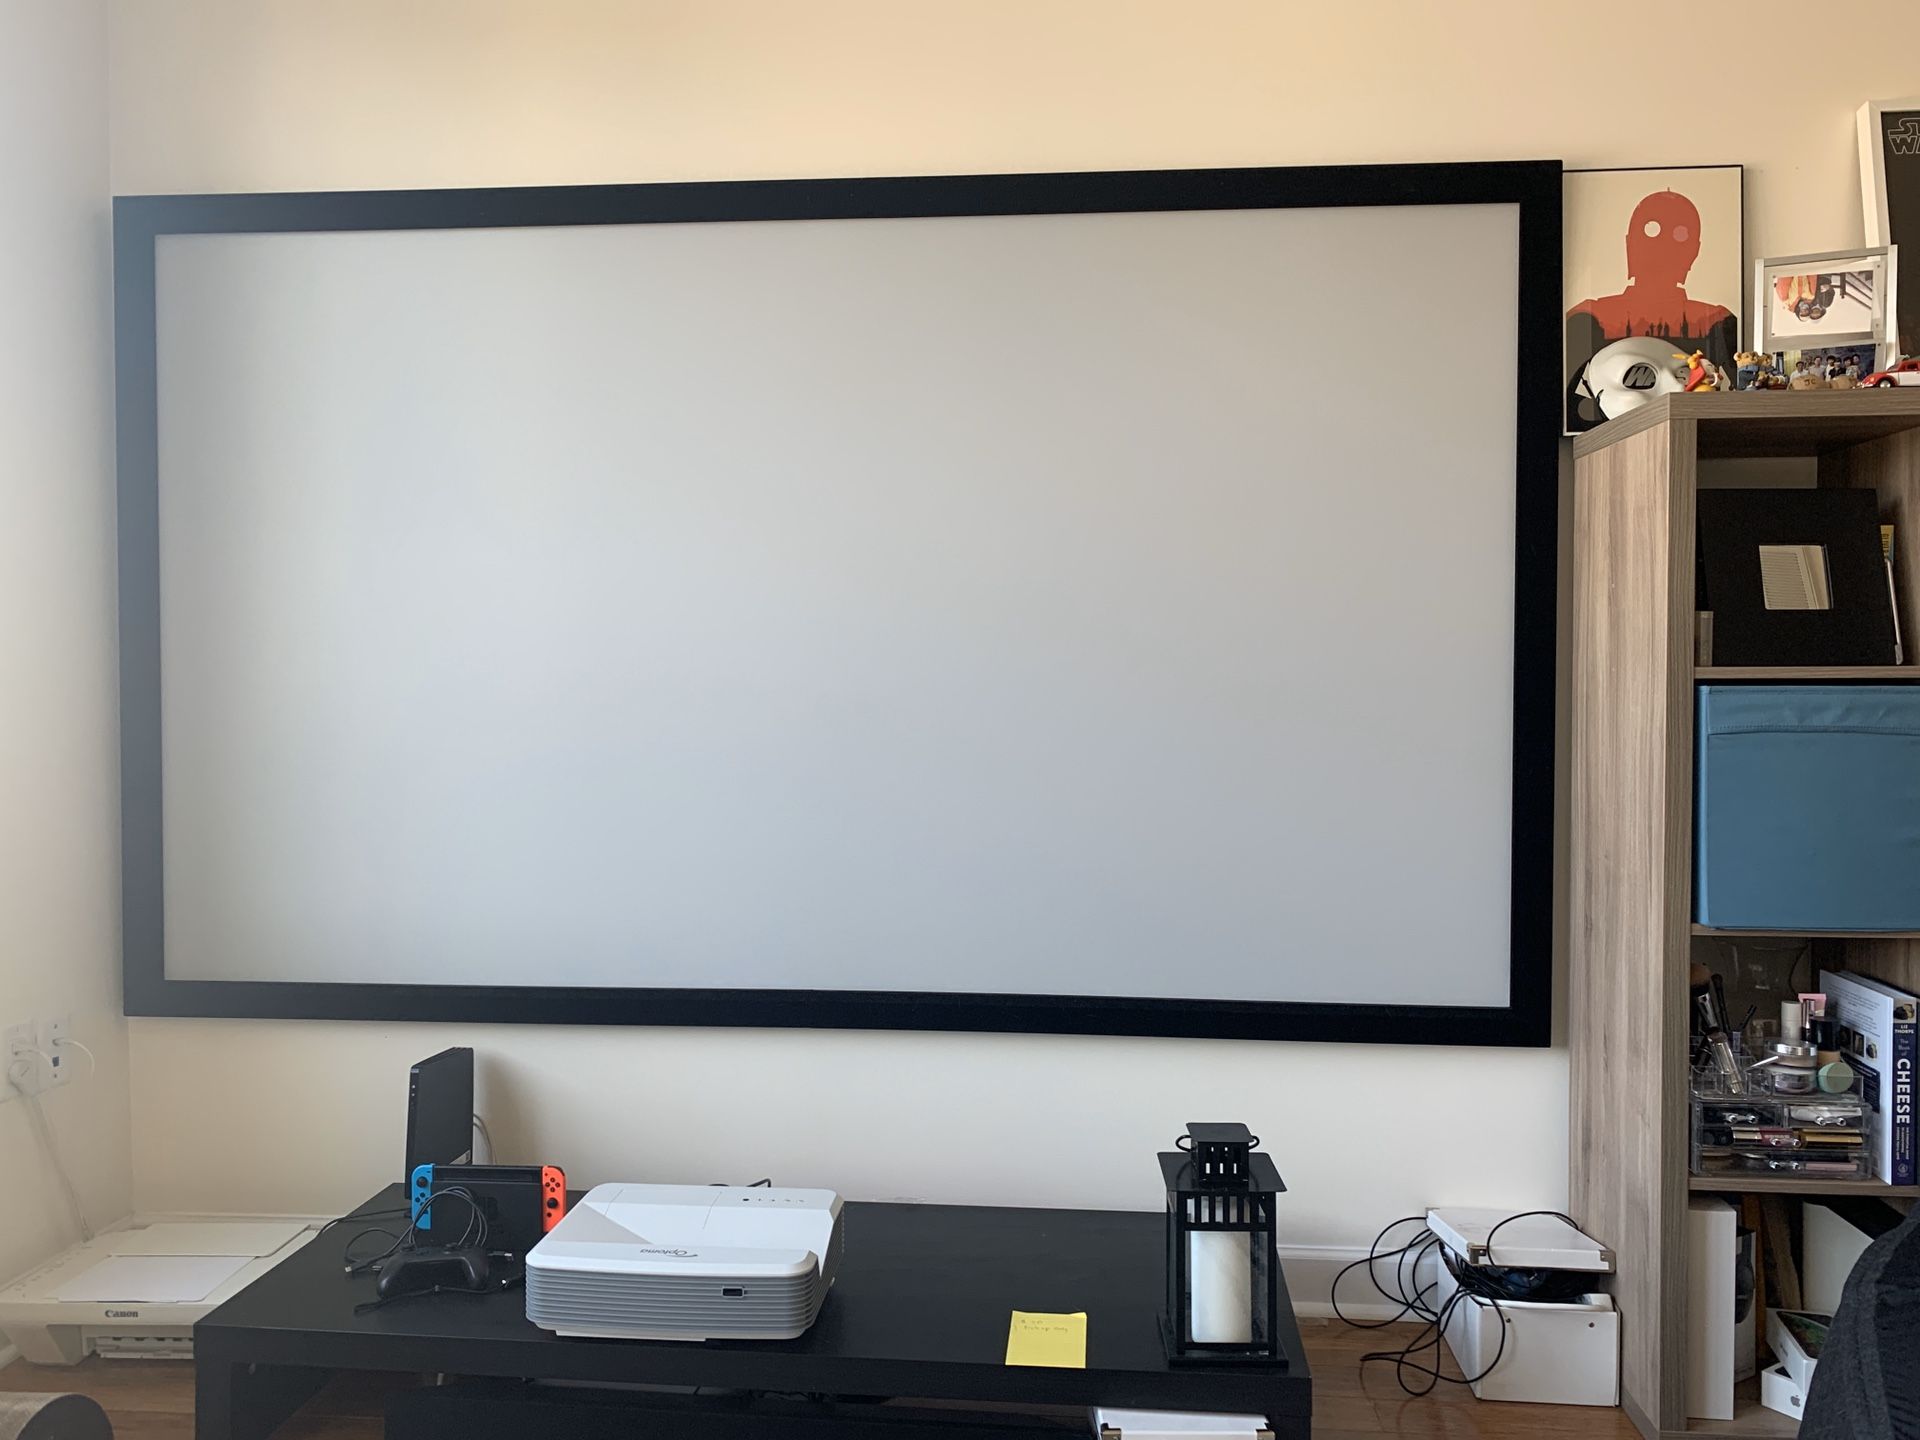 Projector screen (projector not included)